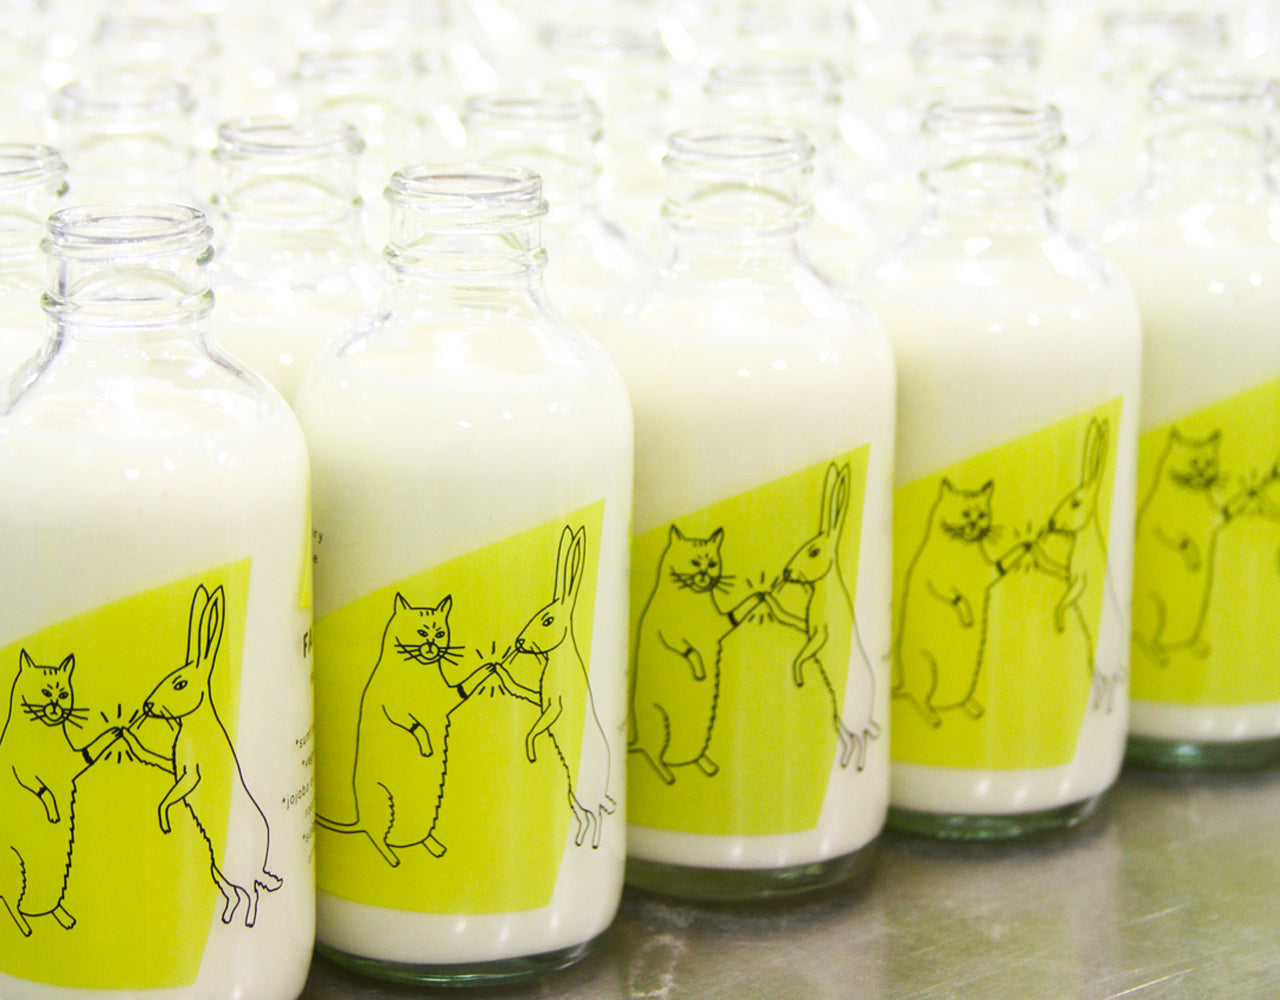 cream cleansers waiting in rows after being filled to be capped. the drawing on the bottle is a cat high-fiving a rabbit.